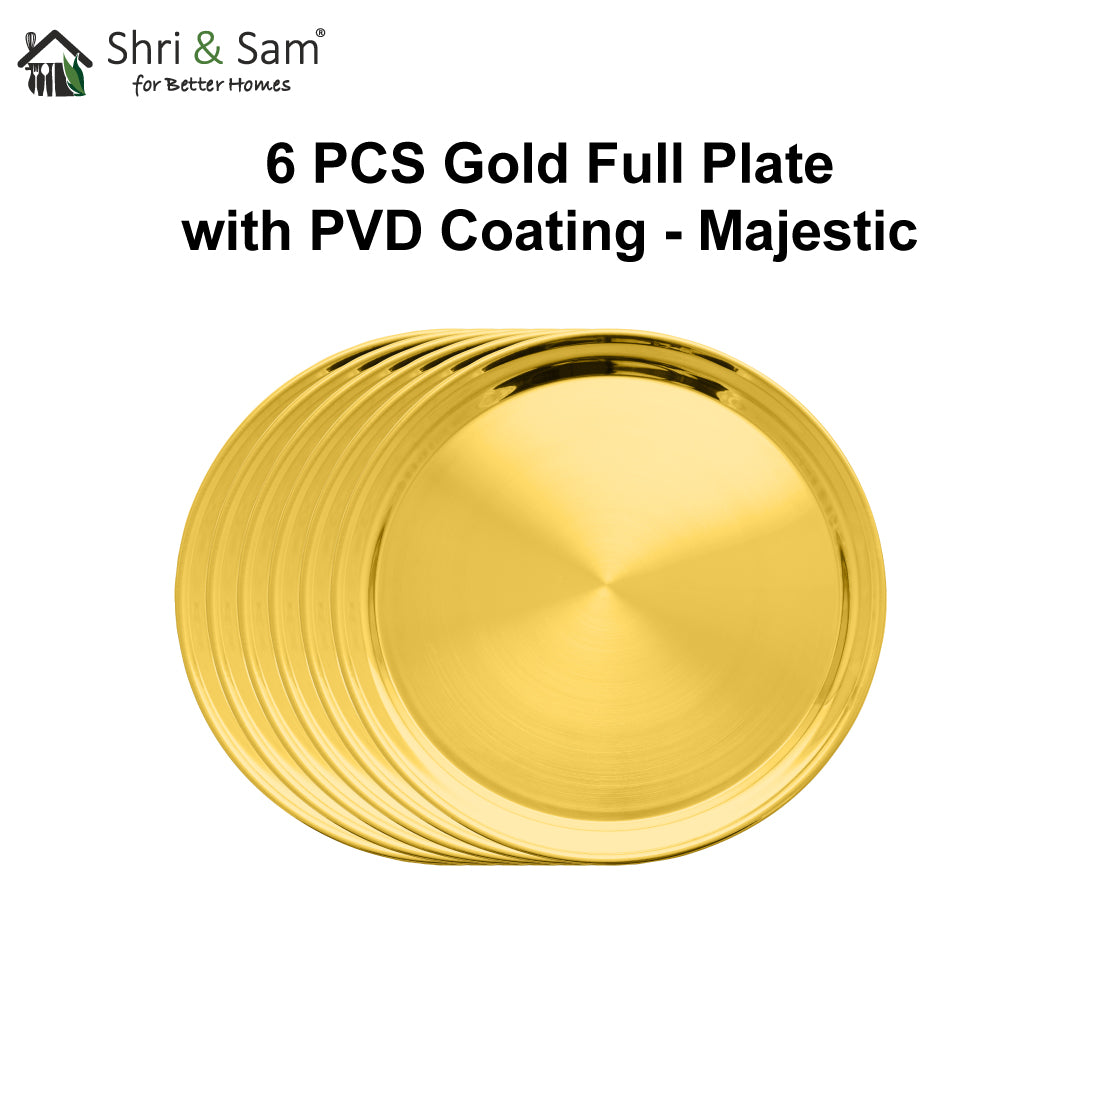 Stainless Steel 6 PCS Full Plate with Gold PVD Coating Majestic